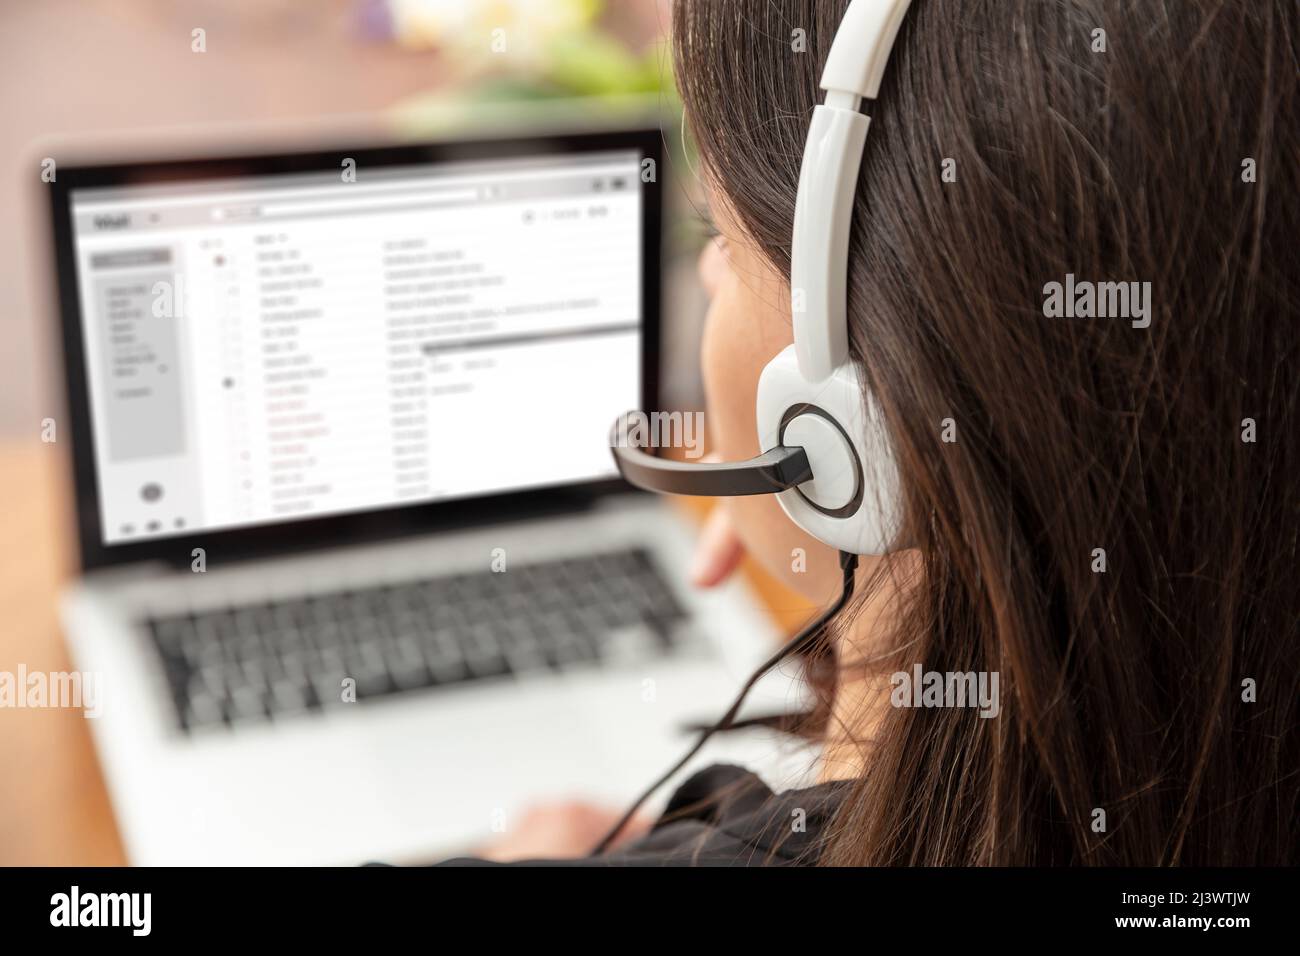 Home office, customer support, help desk concept. Woman with headset working with a laptop, talking on phone, view from behind. Stock Photo